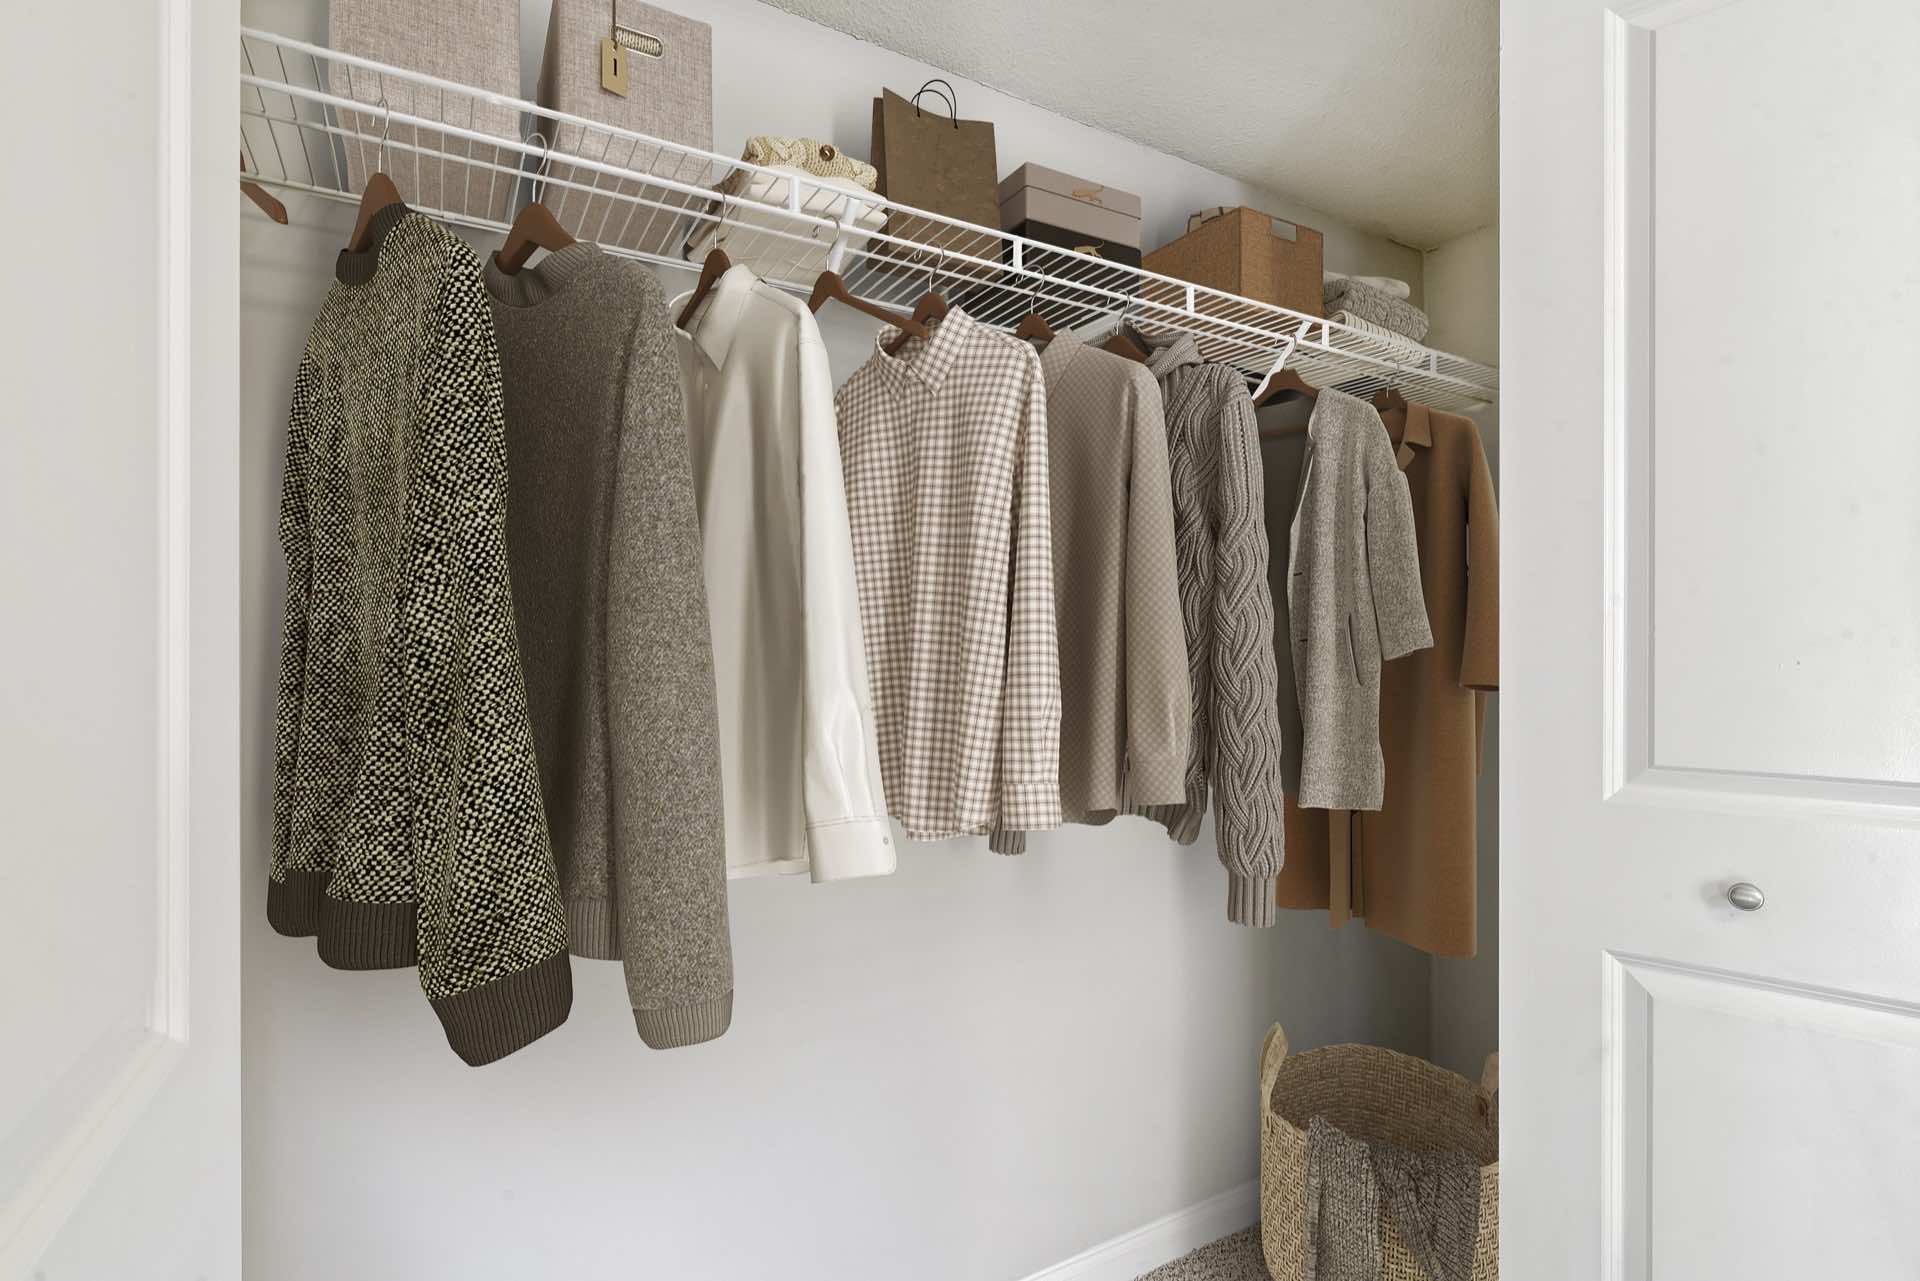 walk-in closet with white-wire shelving and clothes on hangers